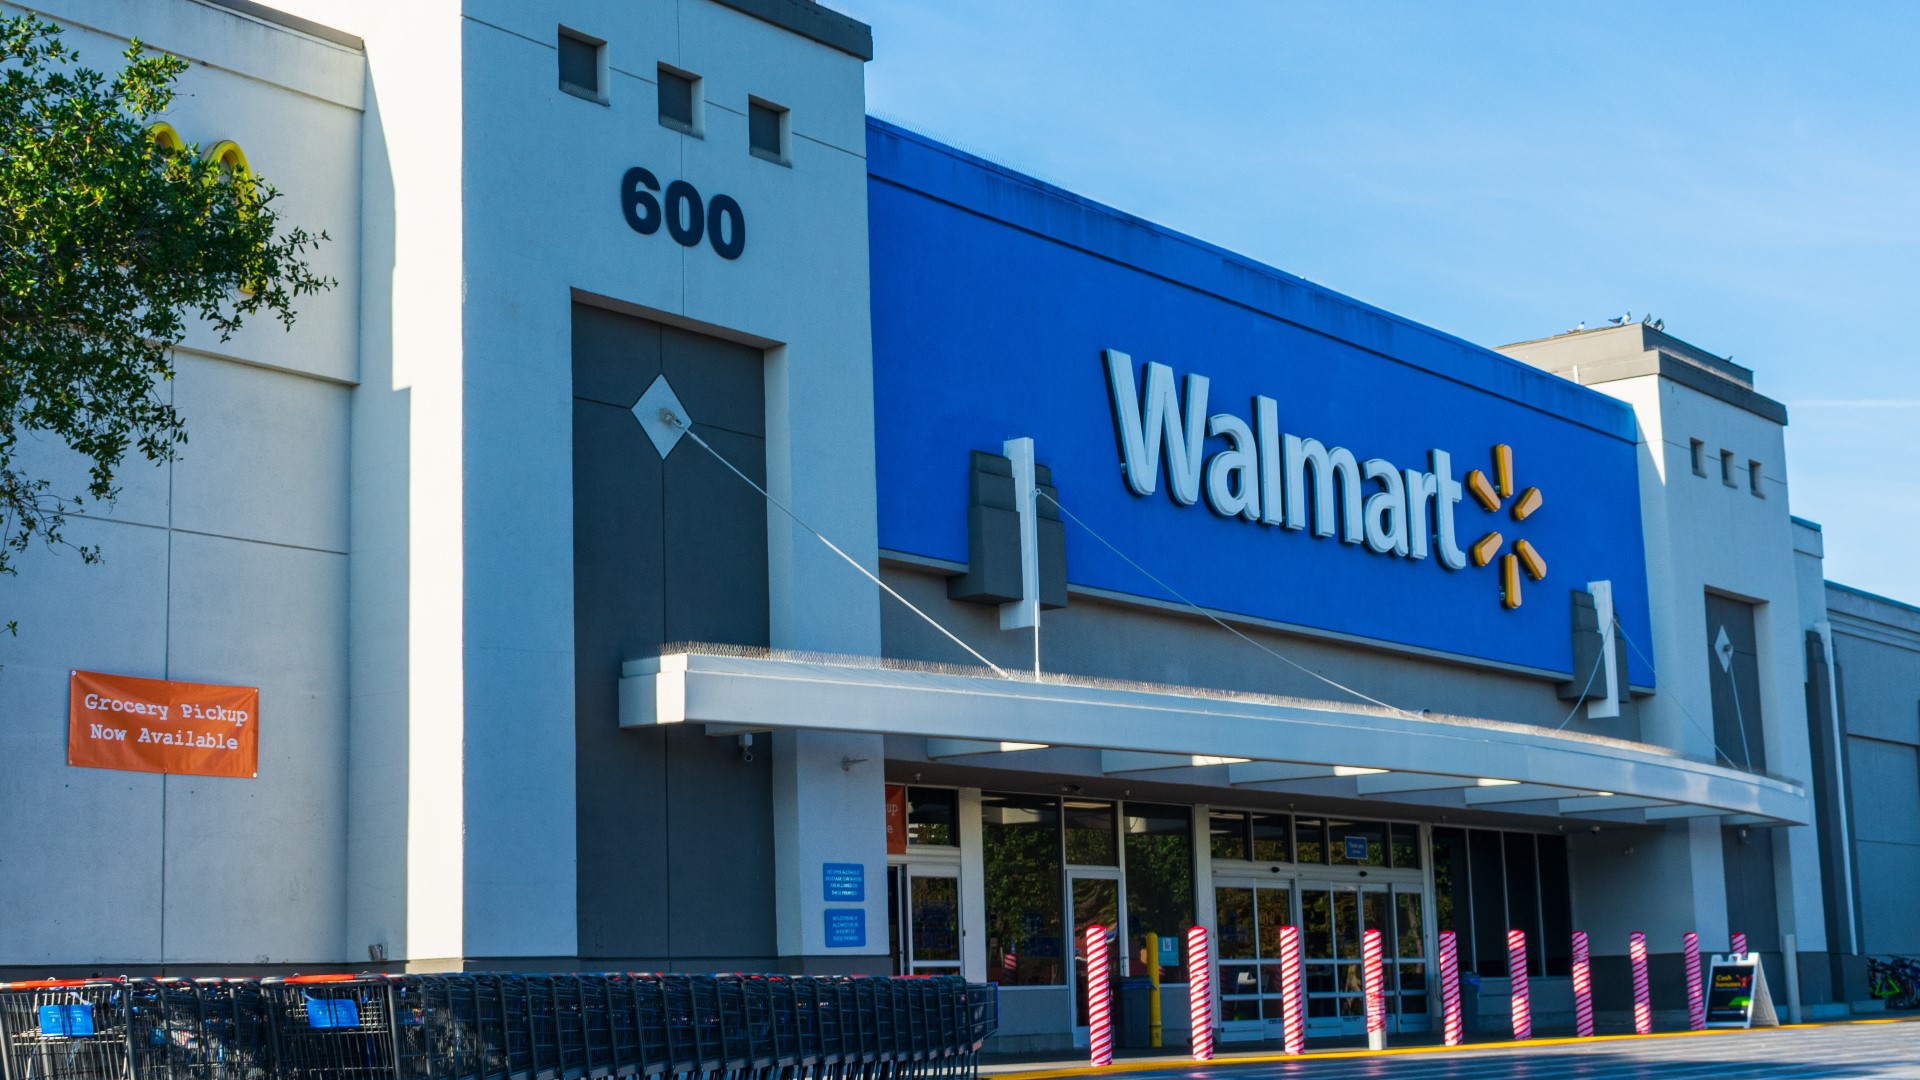 Walmart said that automating stores would maintain or "even [increase] its number of associates as new roles are created."